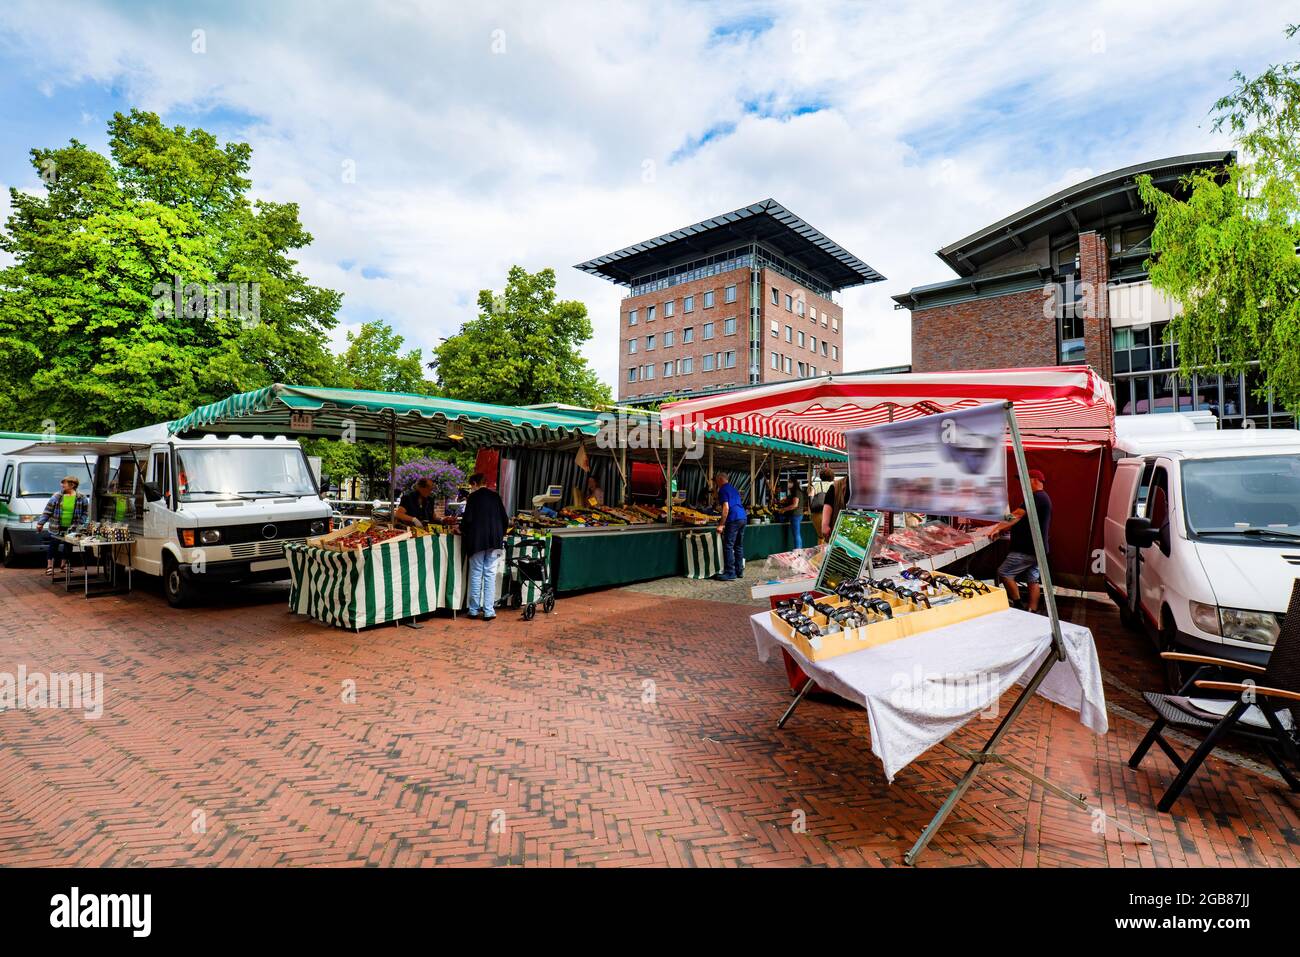 Weekly market with stalls in Papenburg, Germany Stock Photo